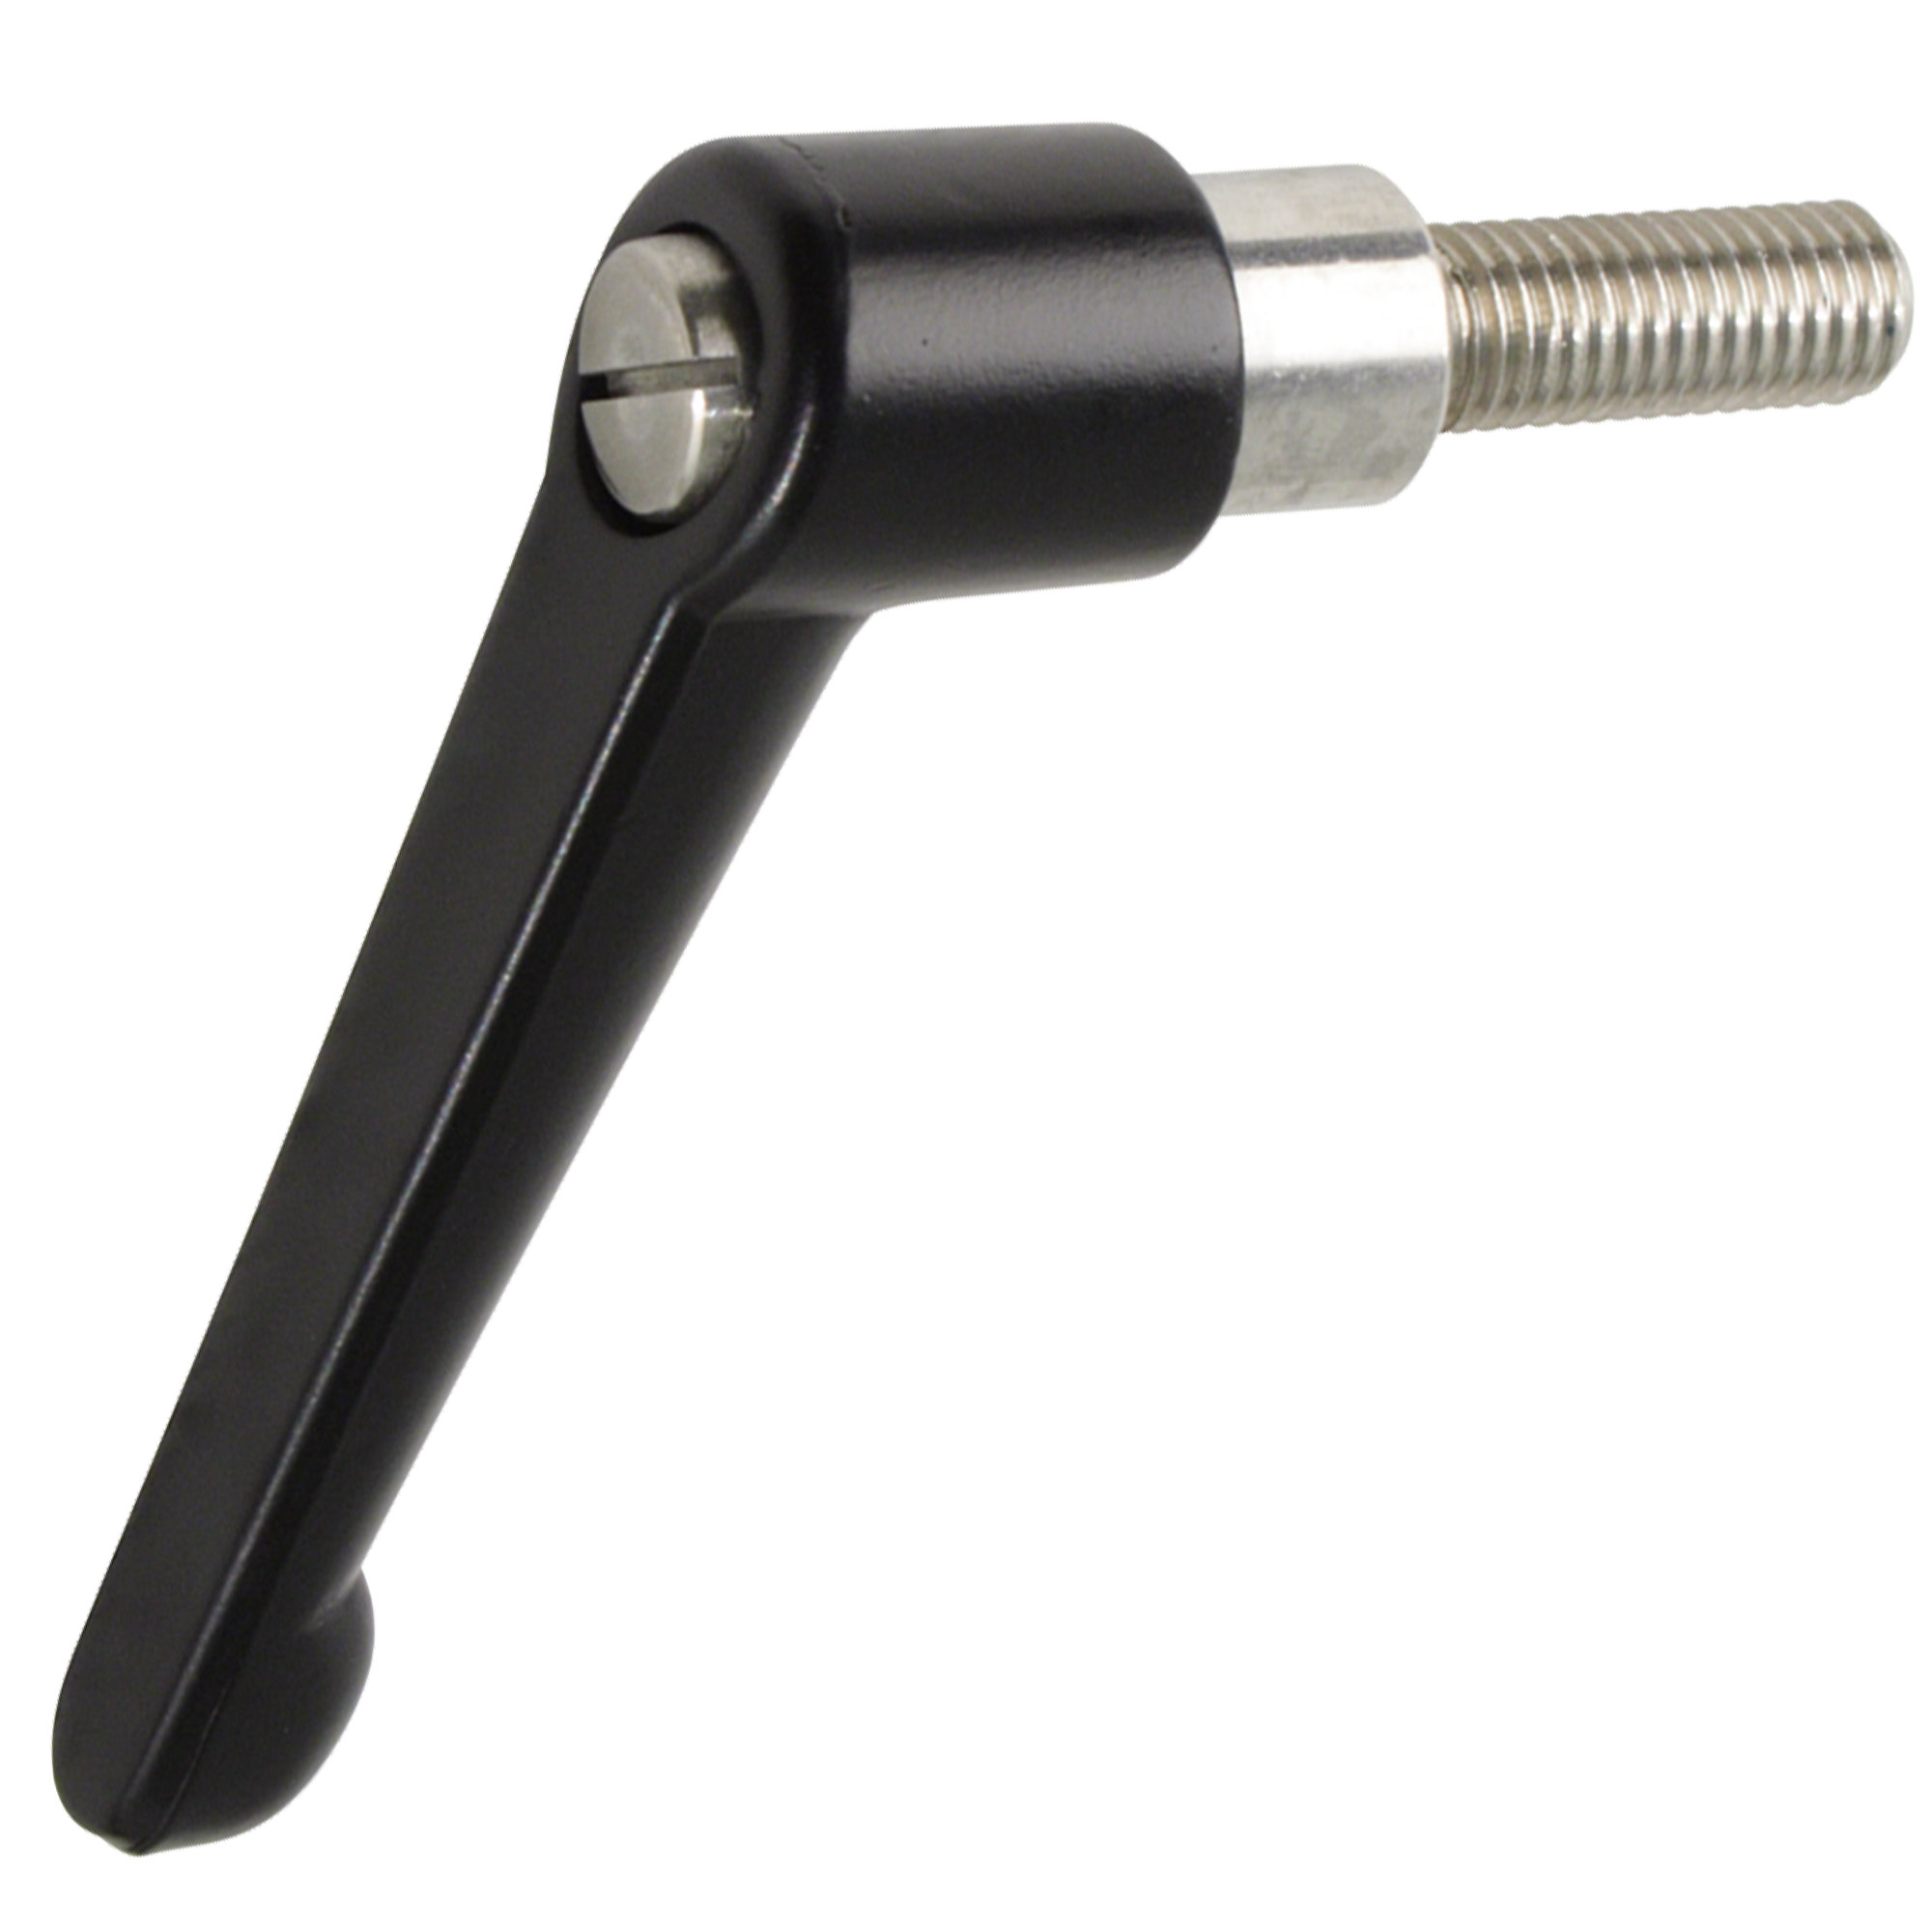 Tension Handle - Stainless